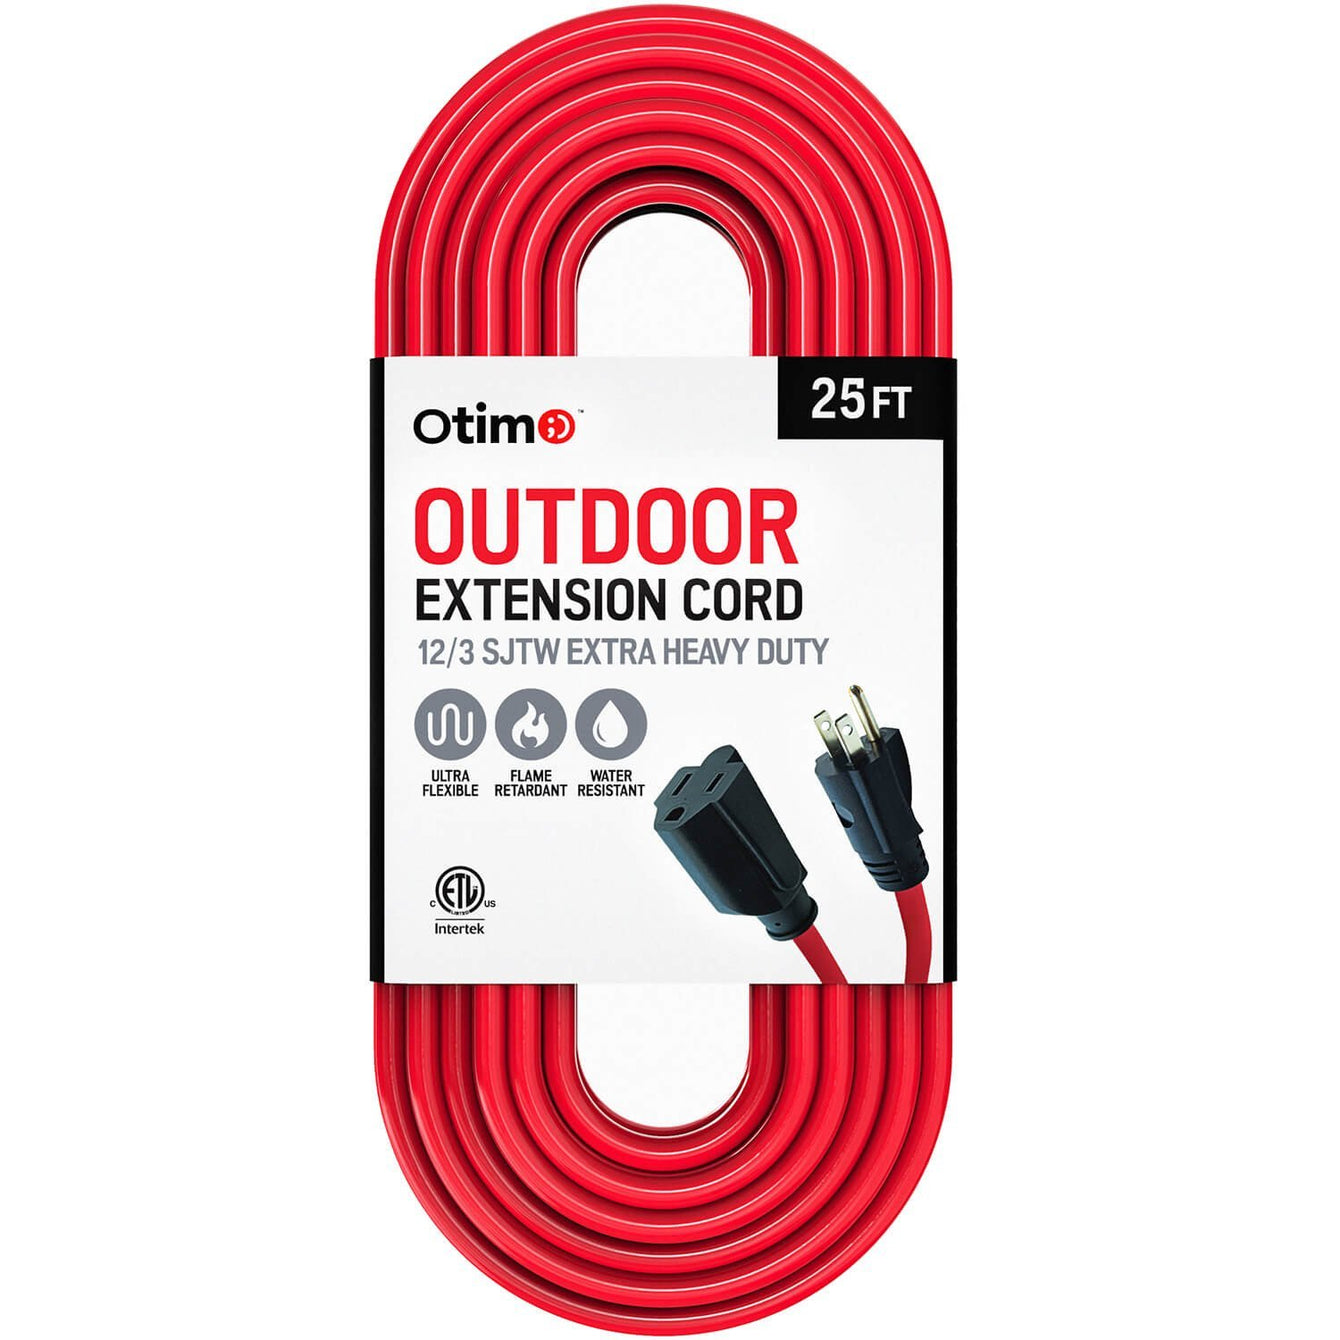 Otimo 25 ft 12/3 Outdoor Extra Heavy Duty Extension Cord - 3 Prong Extension Cord, Red